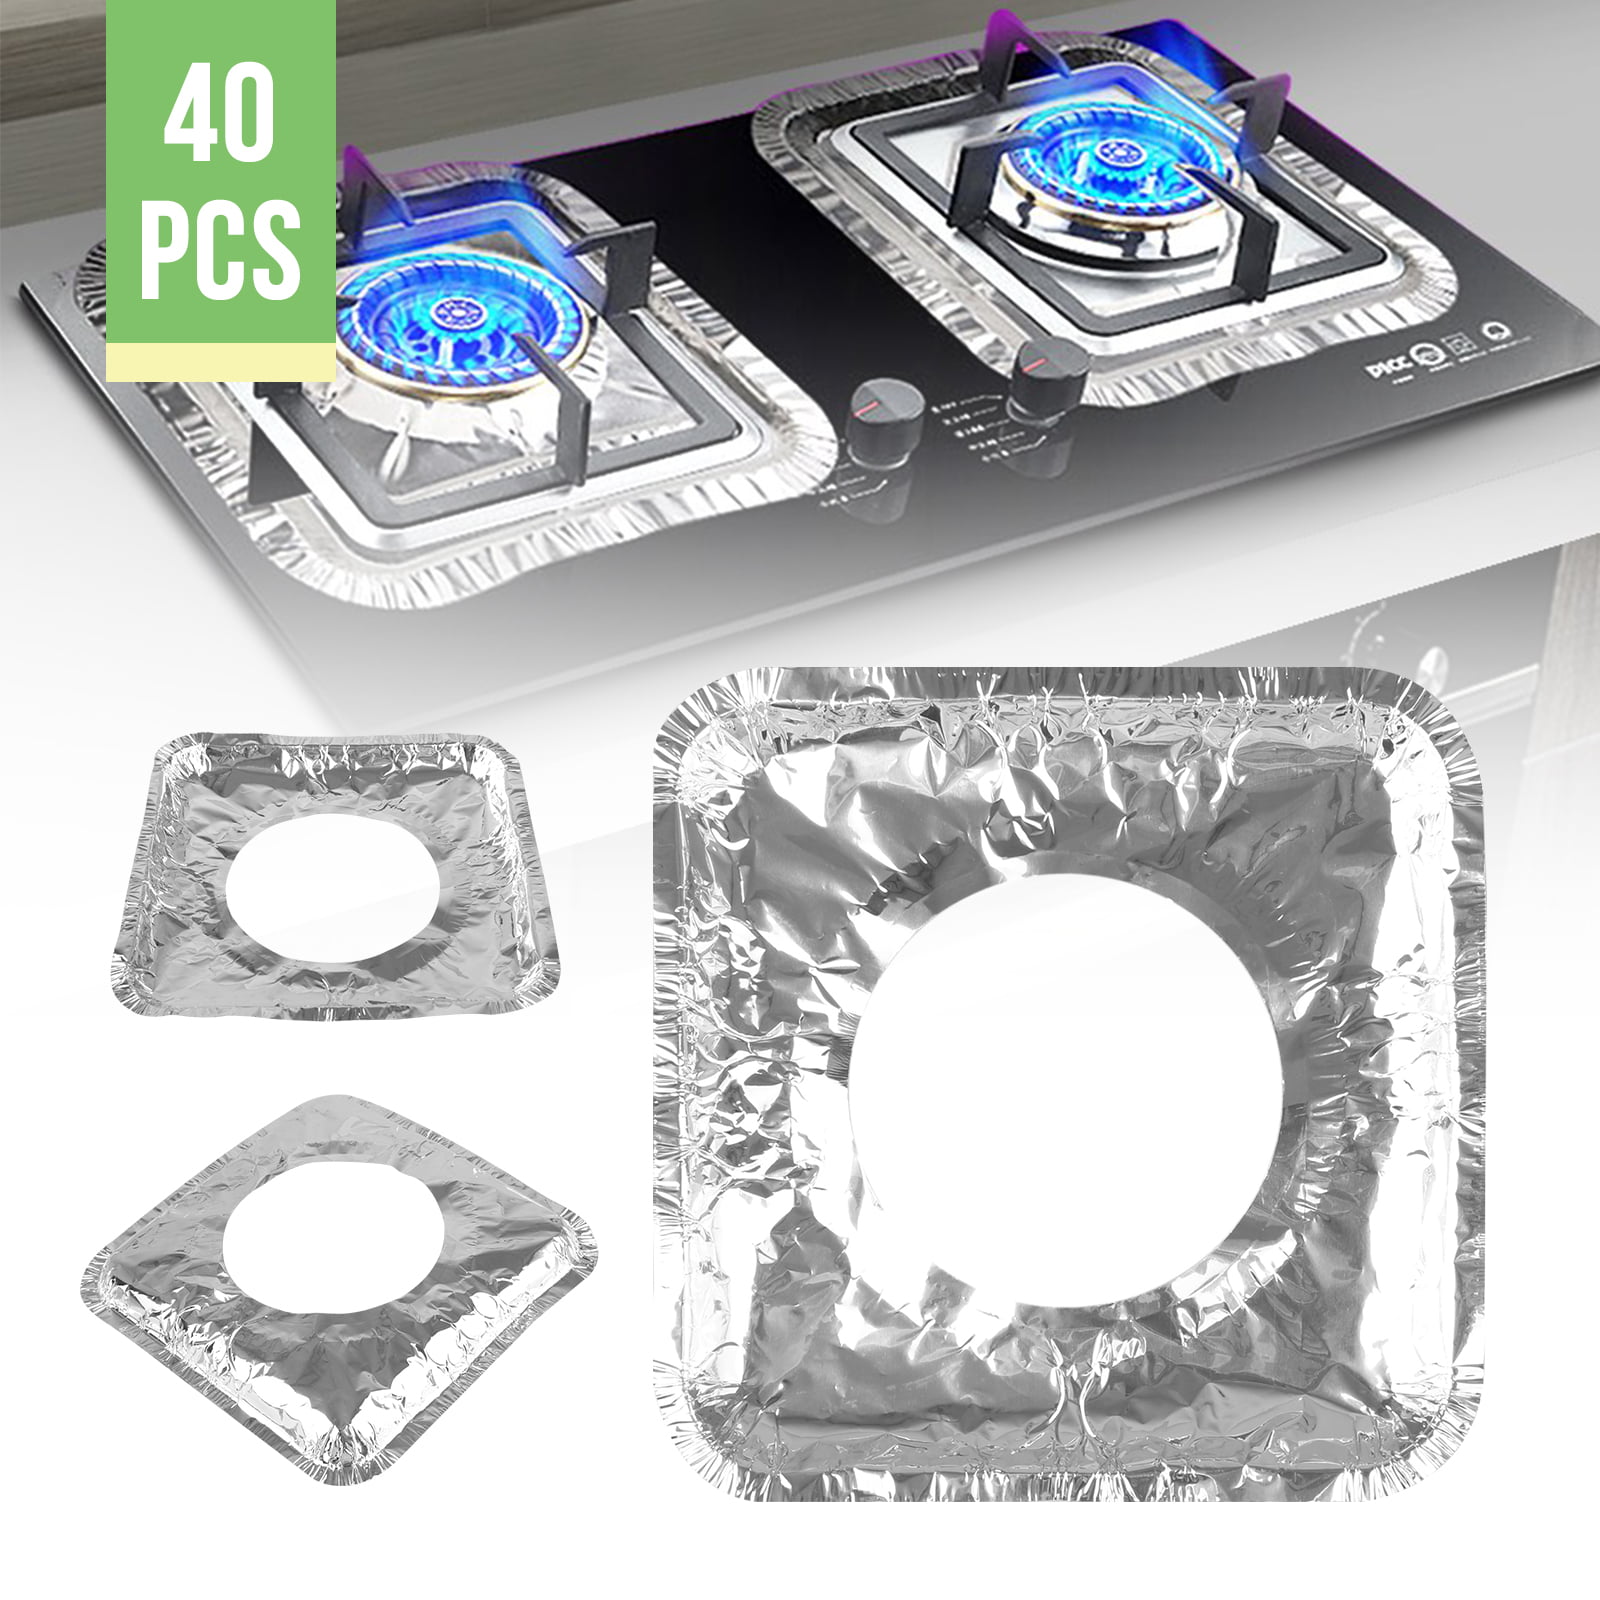 Latest Stove Burner Covers Walmart Ideas in 2022